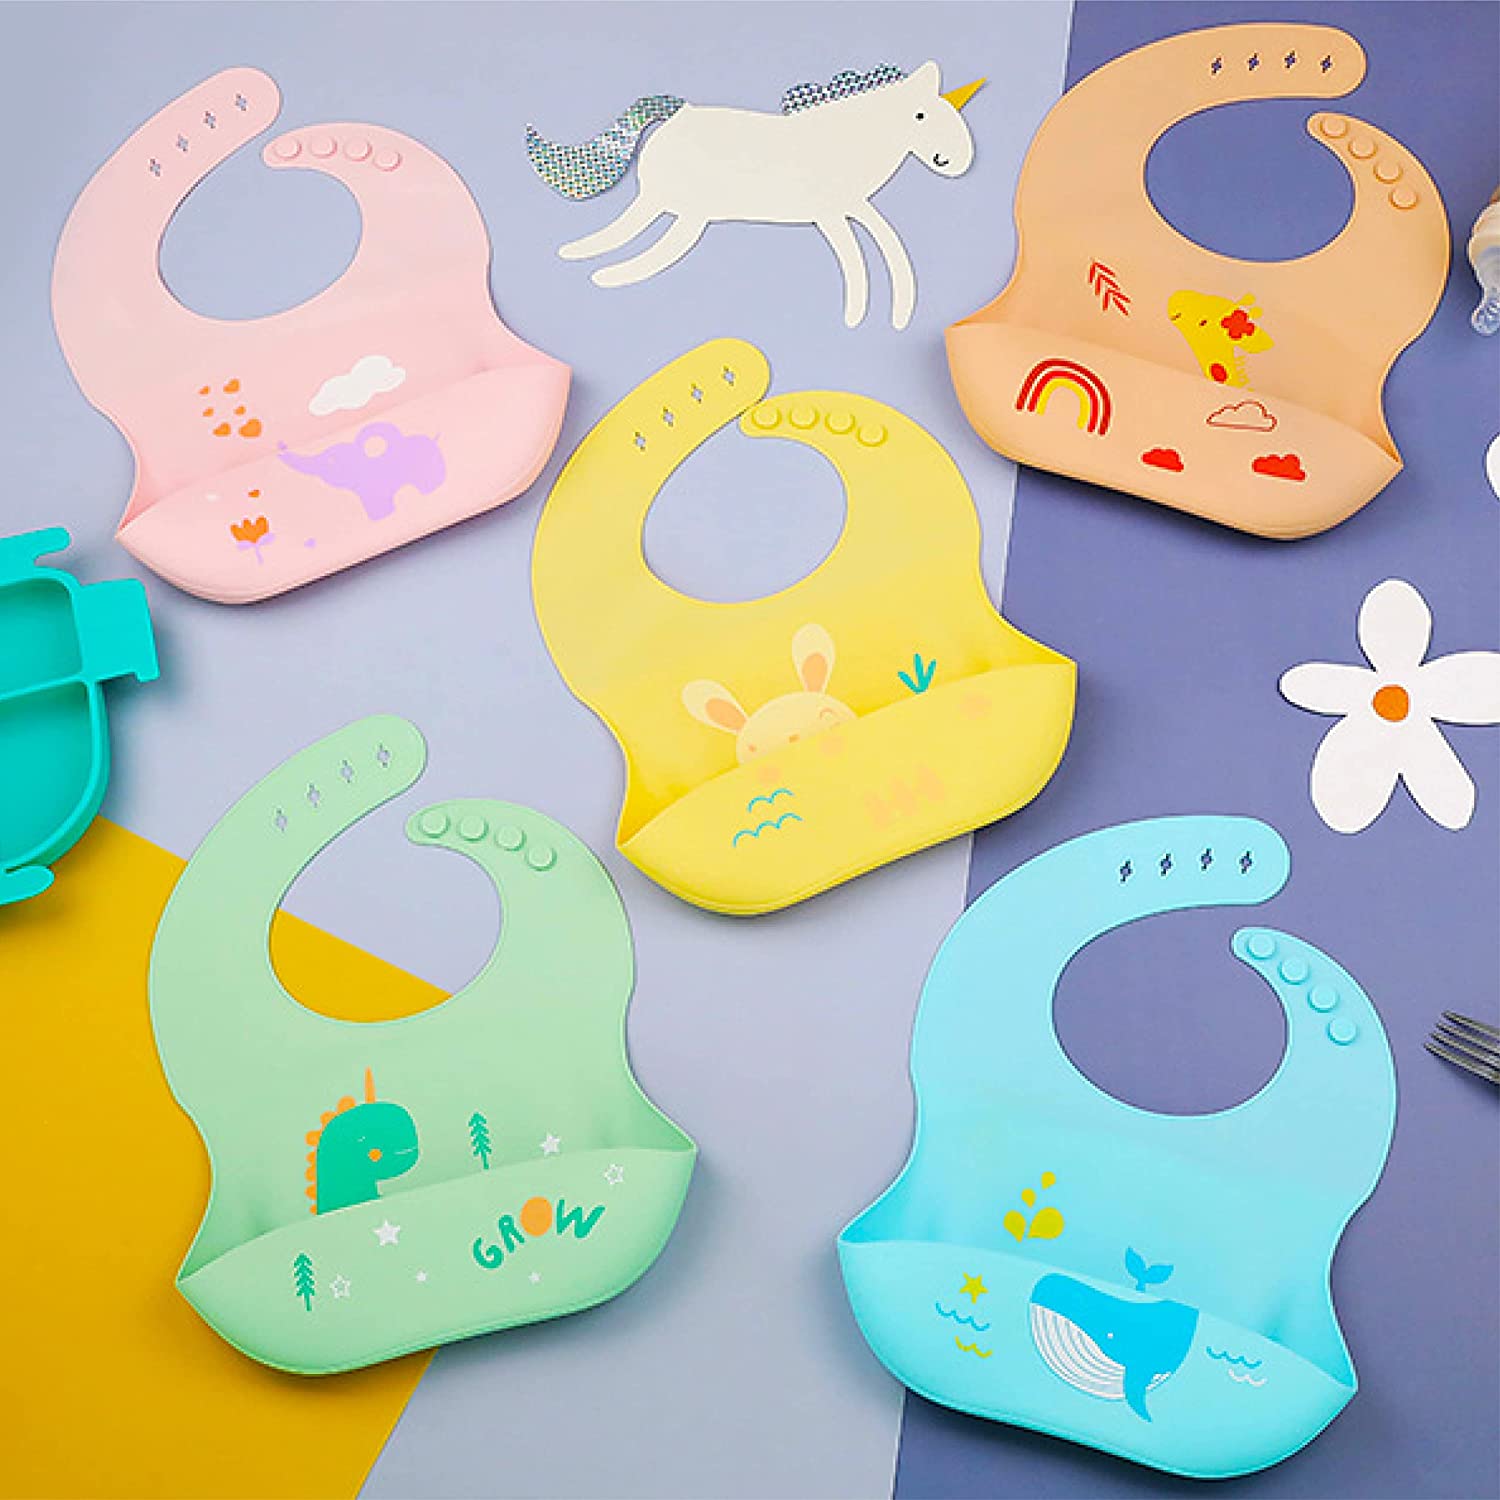 Silicone Bibs Animal Collection| Waterproof Silicone Baby Bibs for Baby Feeding | Adjustable Fit Silicone Bibs